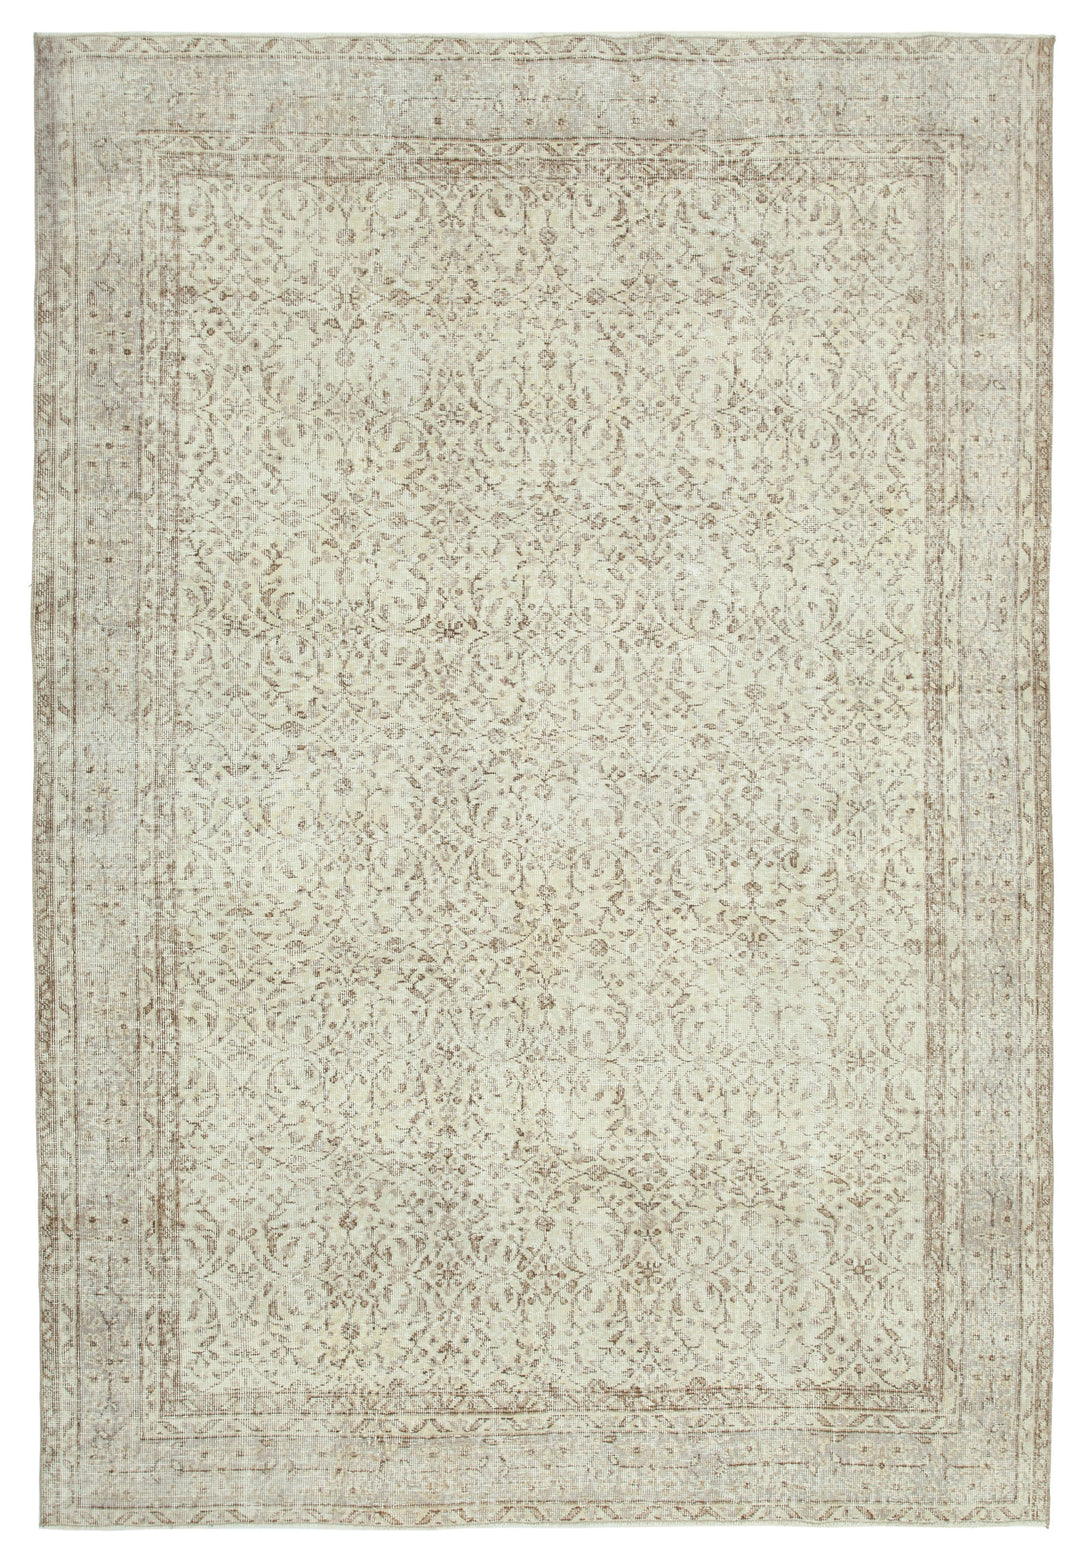 Handmade White Wash Area Rug > Design# OL-AC-25278 > Size: 6'-11" x 9'-11", Carpet Culture Rugs, Handmade Rugs, NYC Rugs, New Rugs, Shop Rugs, Rug Store, Outlet Rugs, SoHo Rugs, Rugs in USA